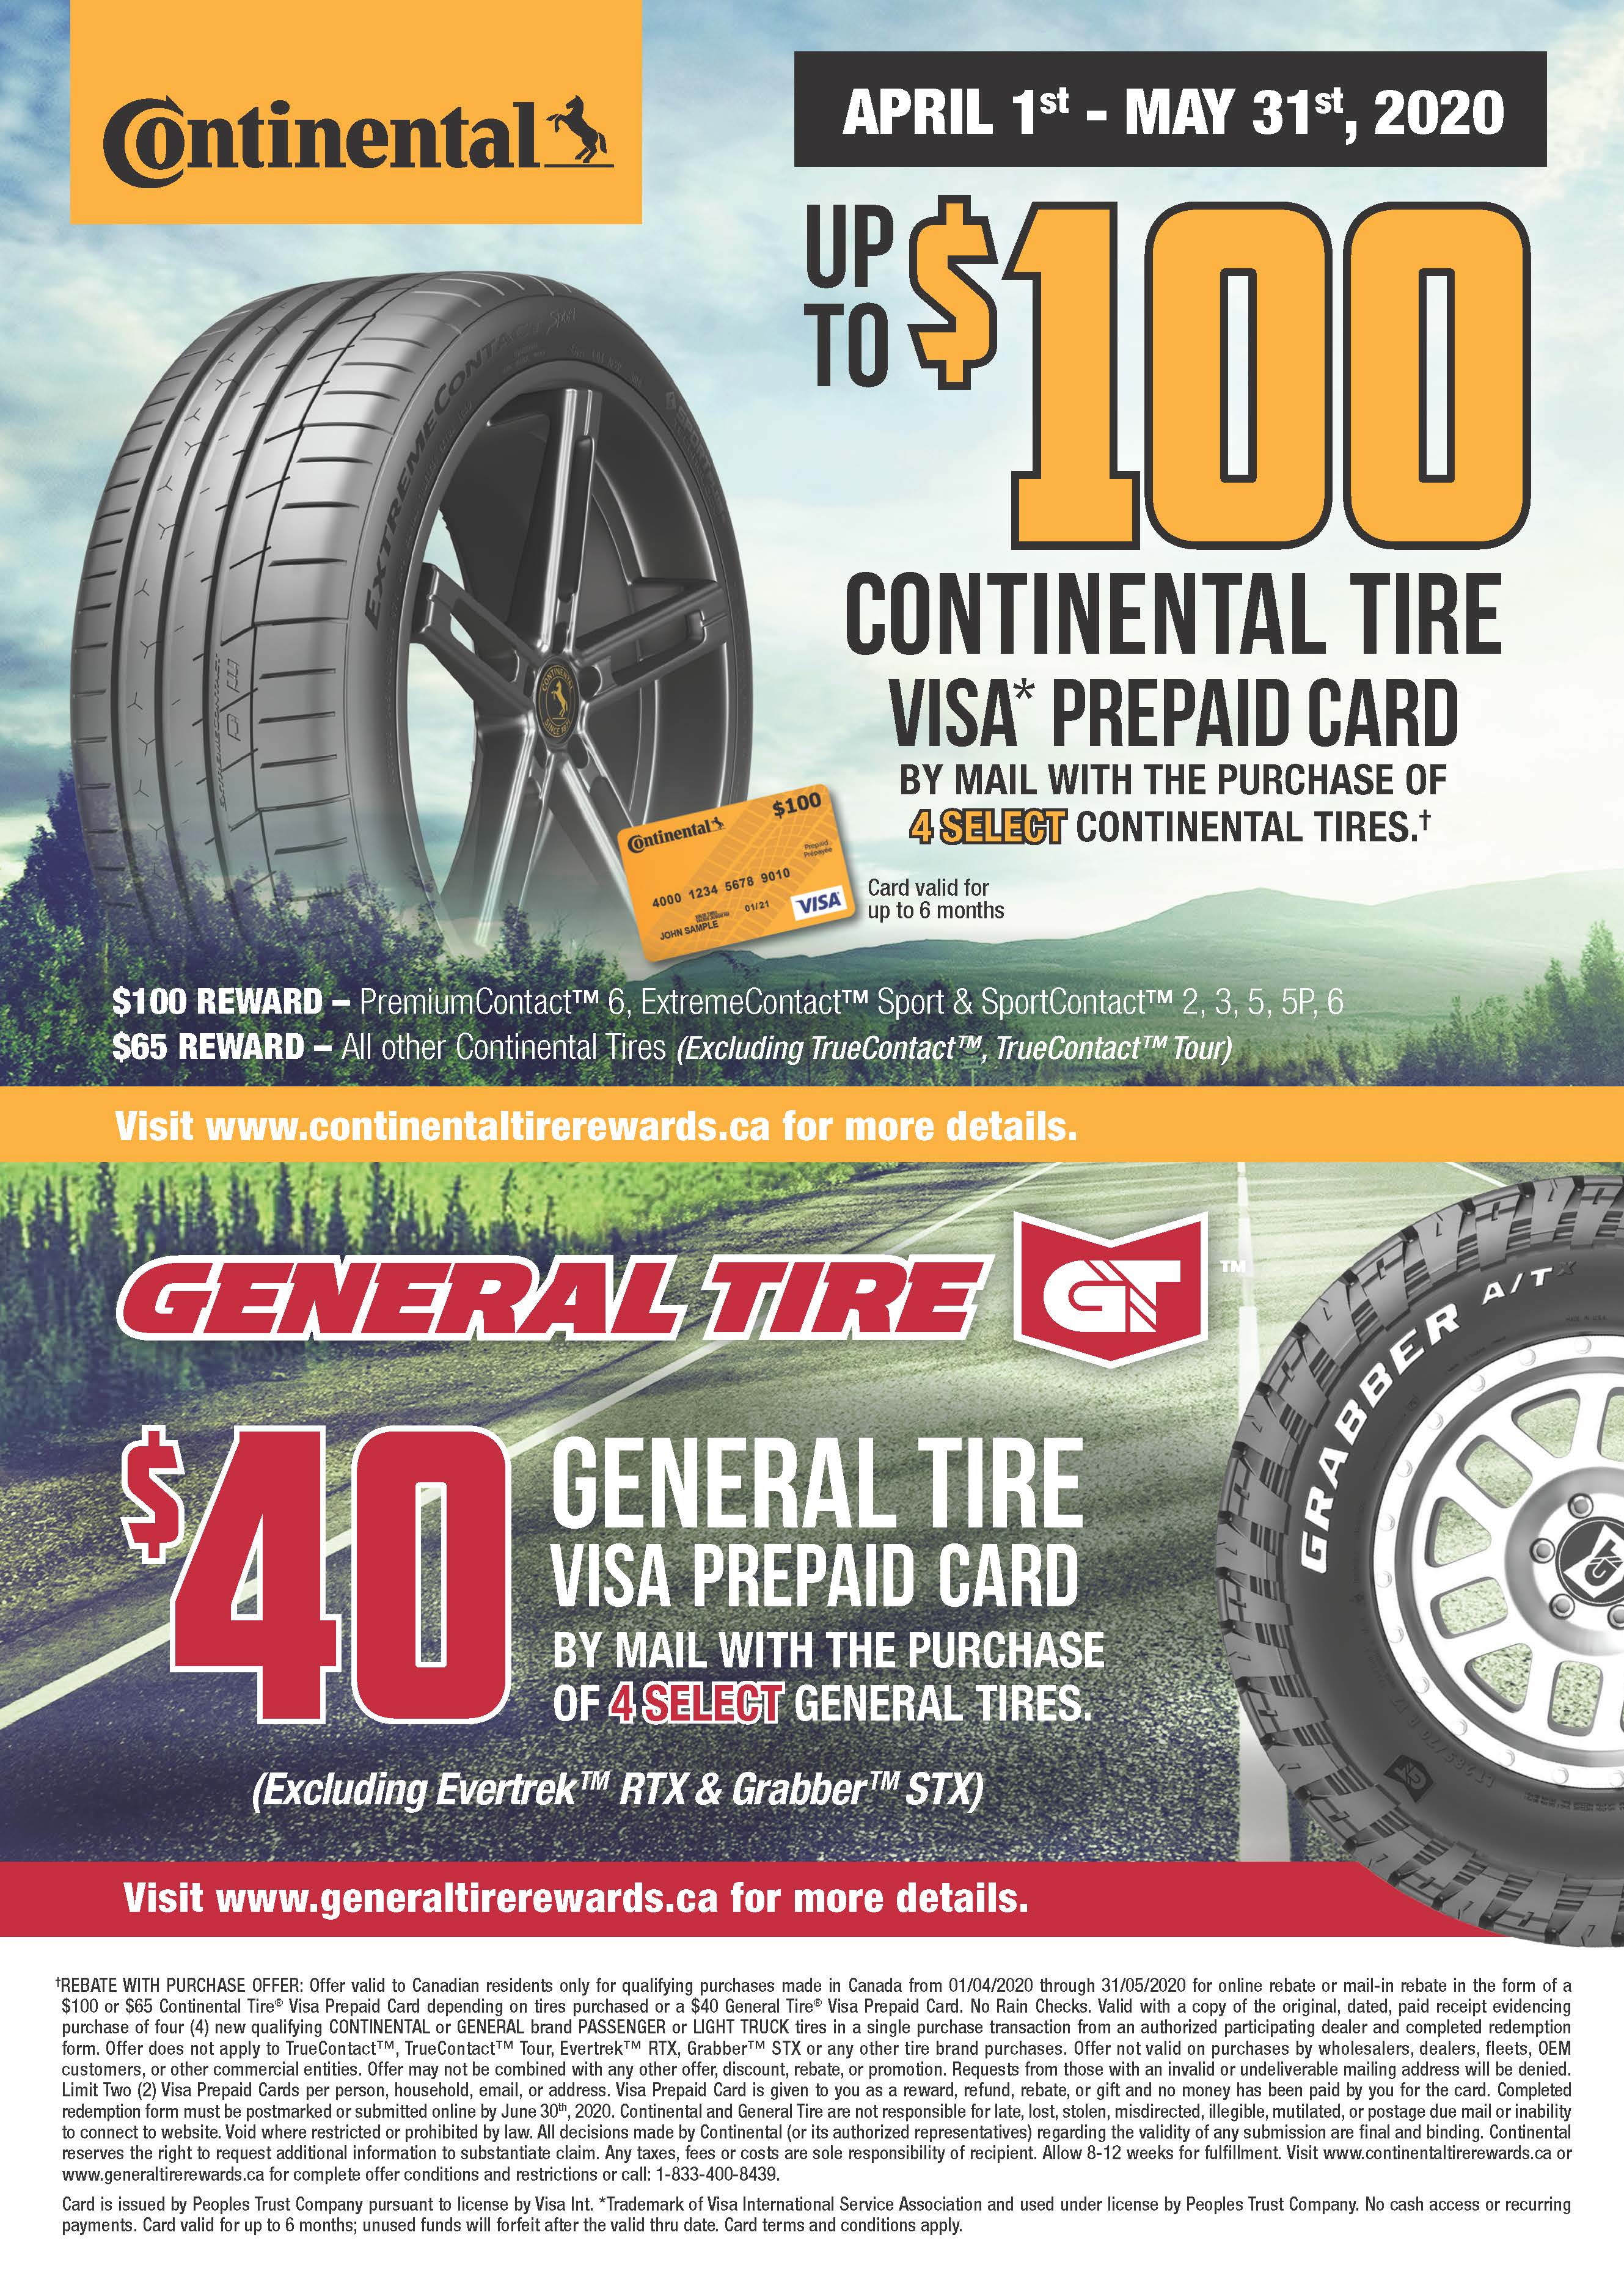 continental-purecontact-rebate-offer-ontario-only-youtube